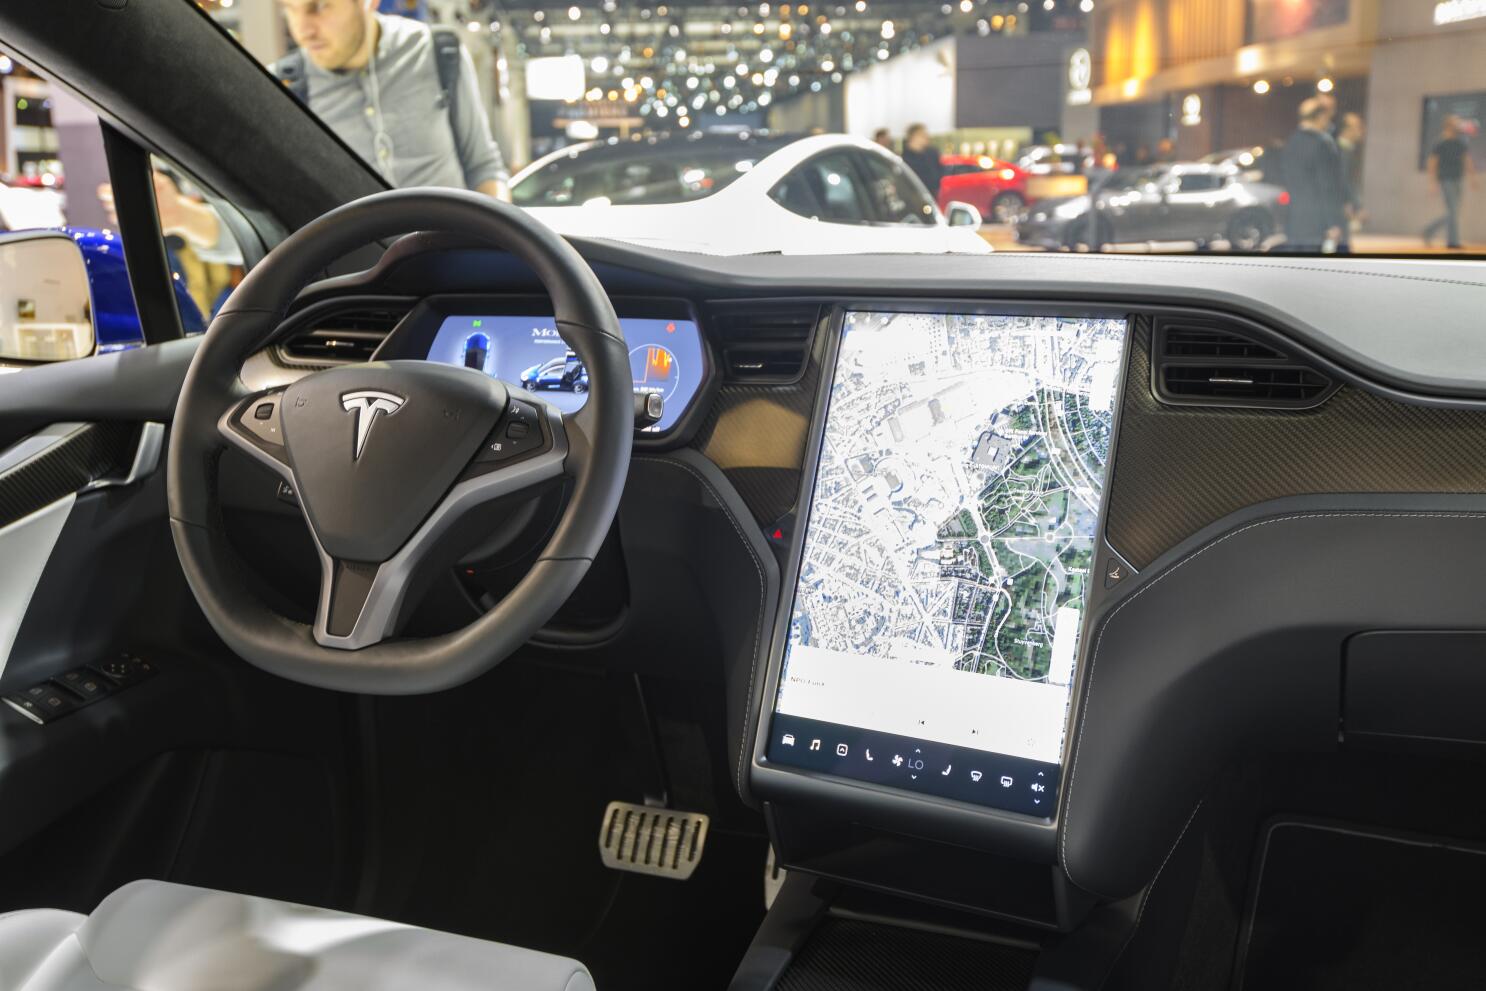 Tesla ordered by regulators to address new Autopilot issue - Los